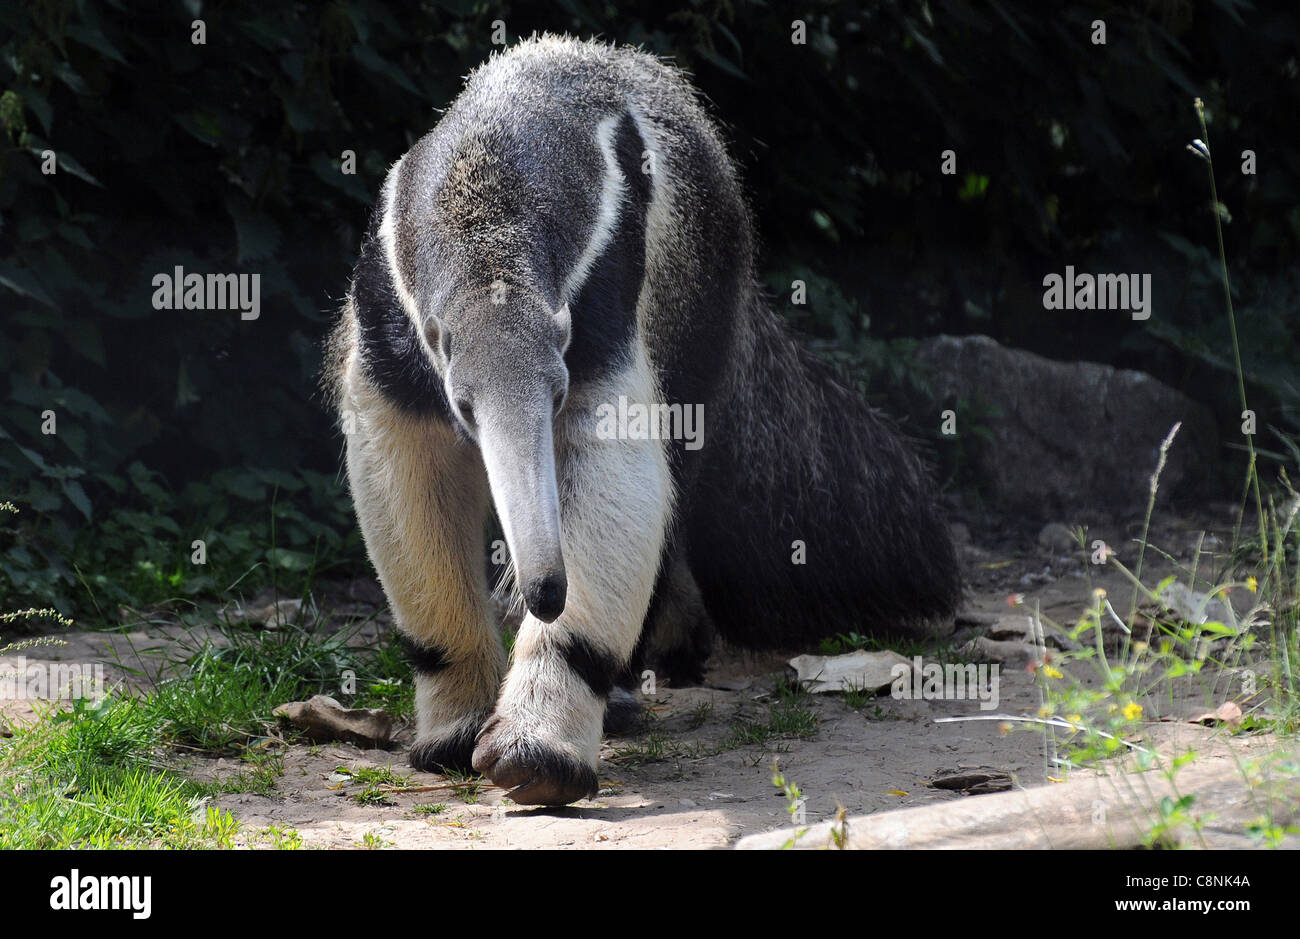 ANTEATER gigante, MARWELL HAMPSHIRE Foto Stock